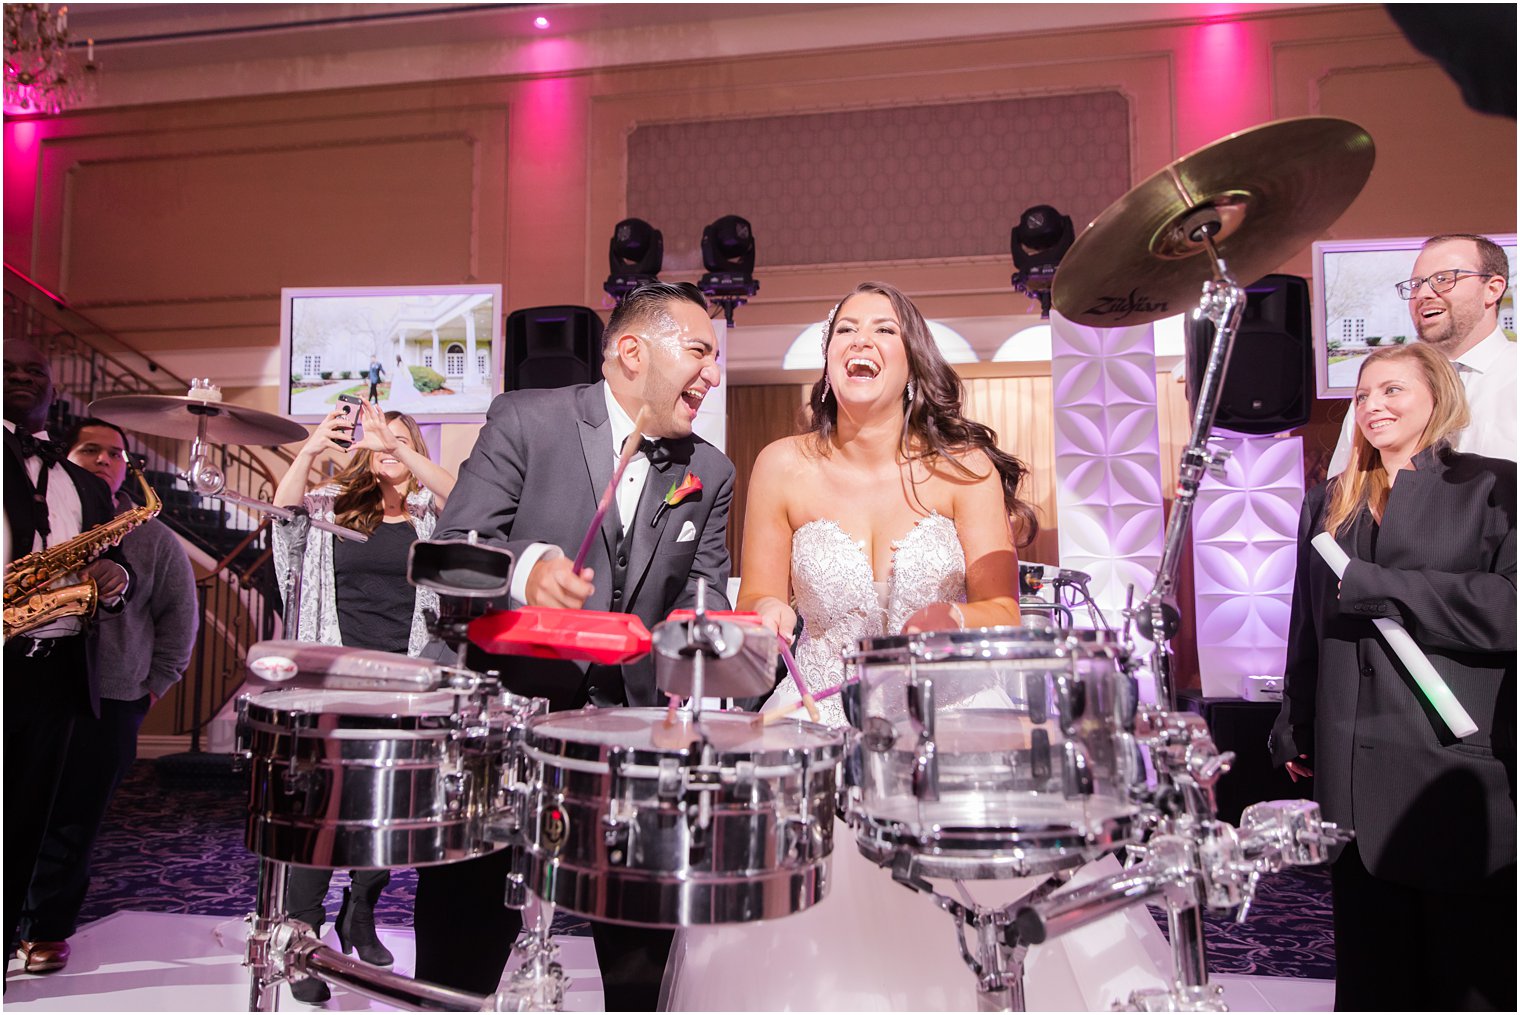 wedding reception fun with drums photographed by Idalia Photography